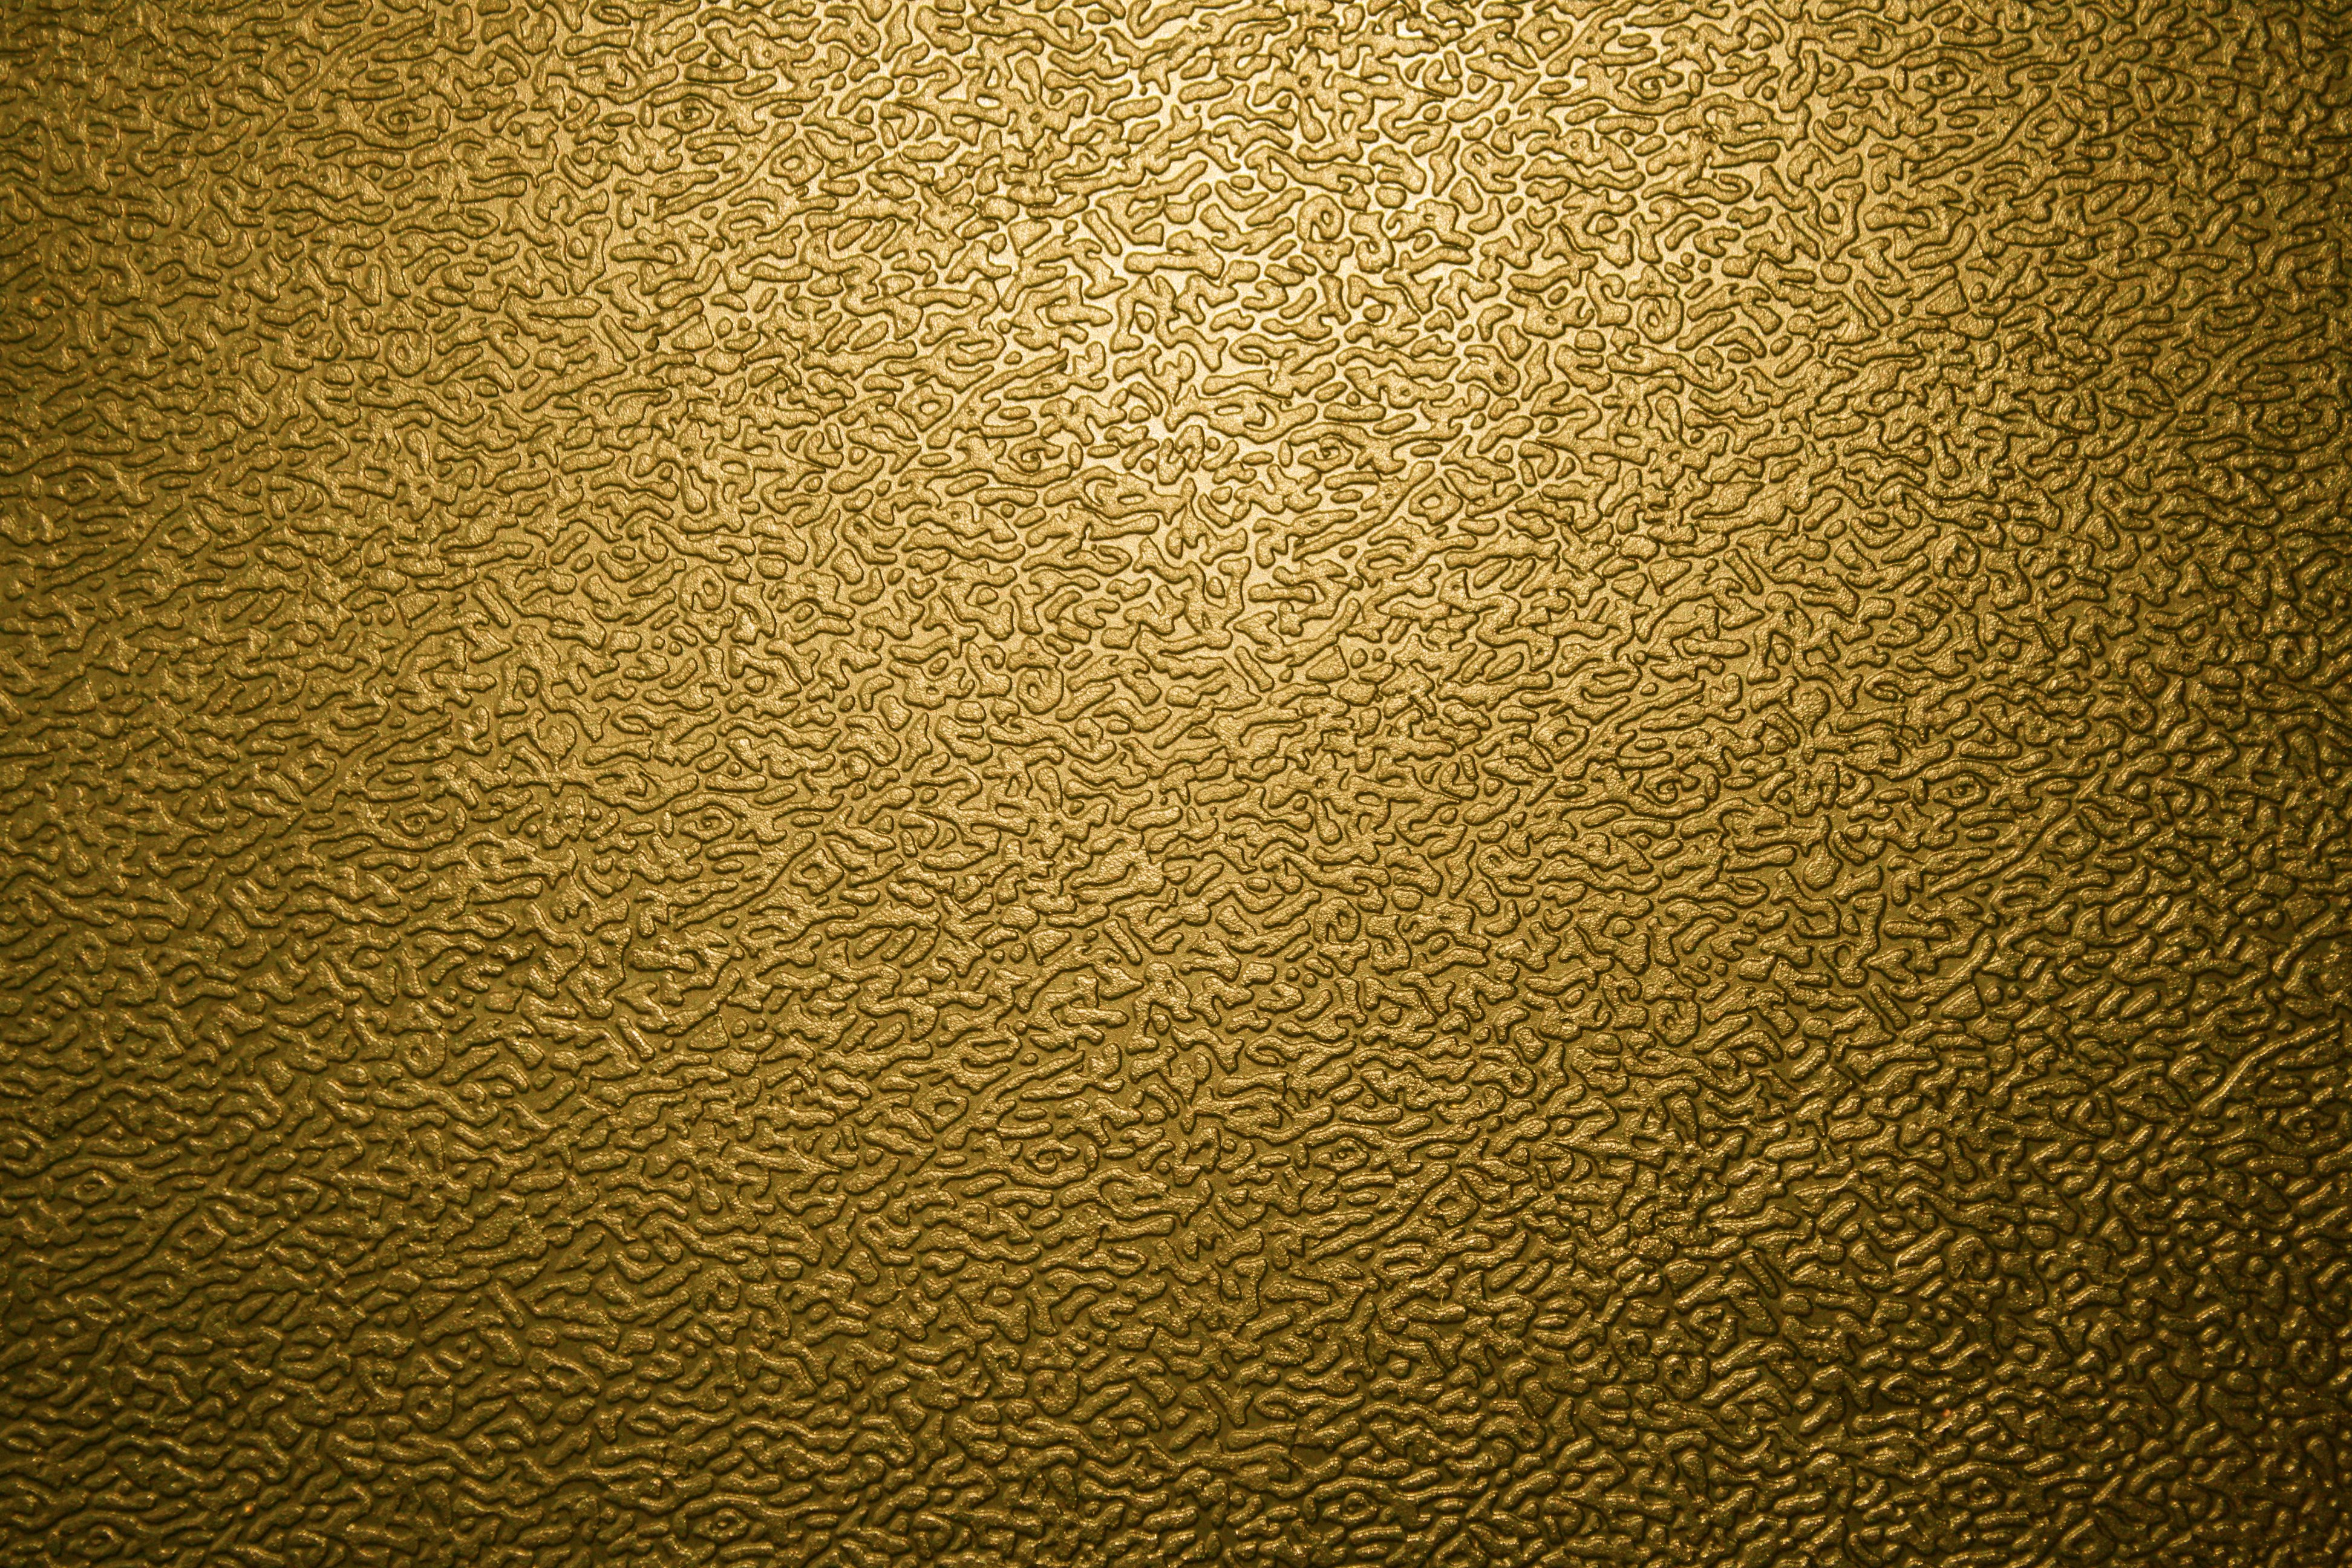 Free Photo Gold Jewelry Texture Gold Jewelry Texture Free Images, Photos, Reviews